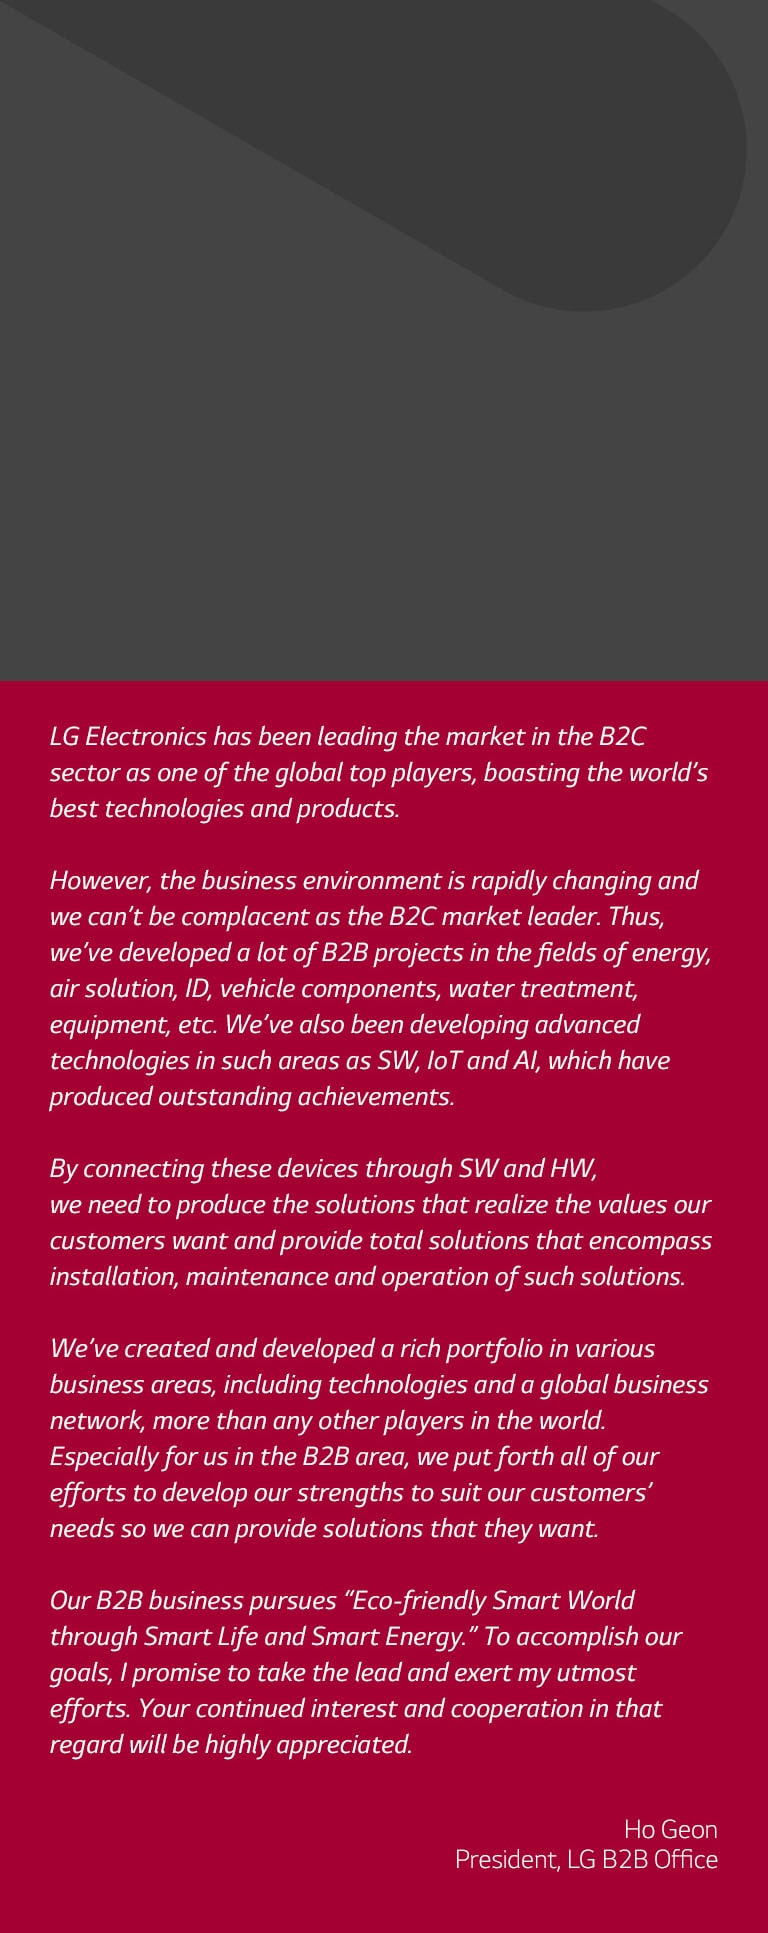 About LG Business_LG.com_MO_02_LG Exceeds Expectations with Innovative Products